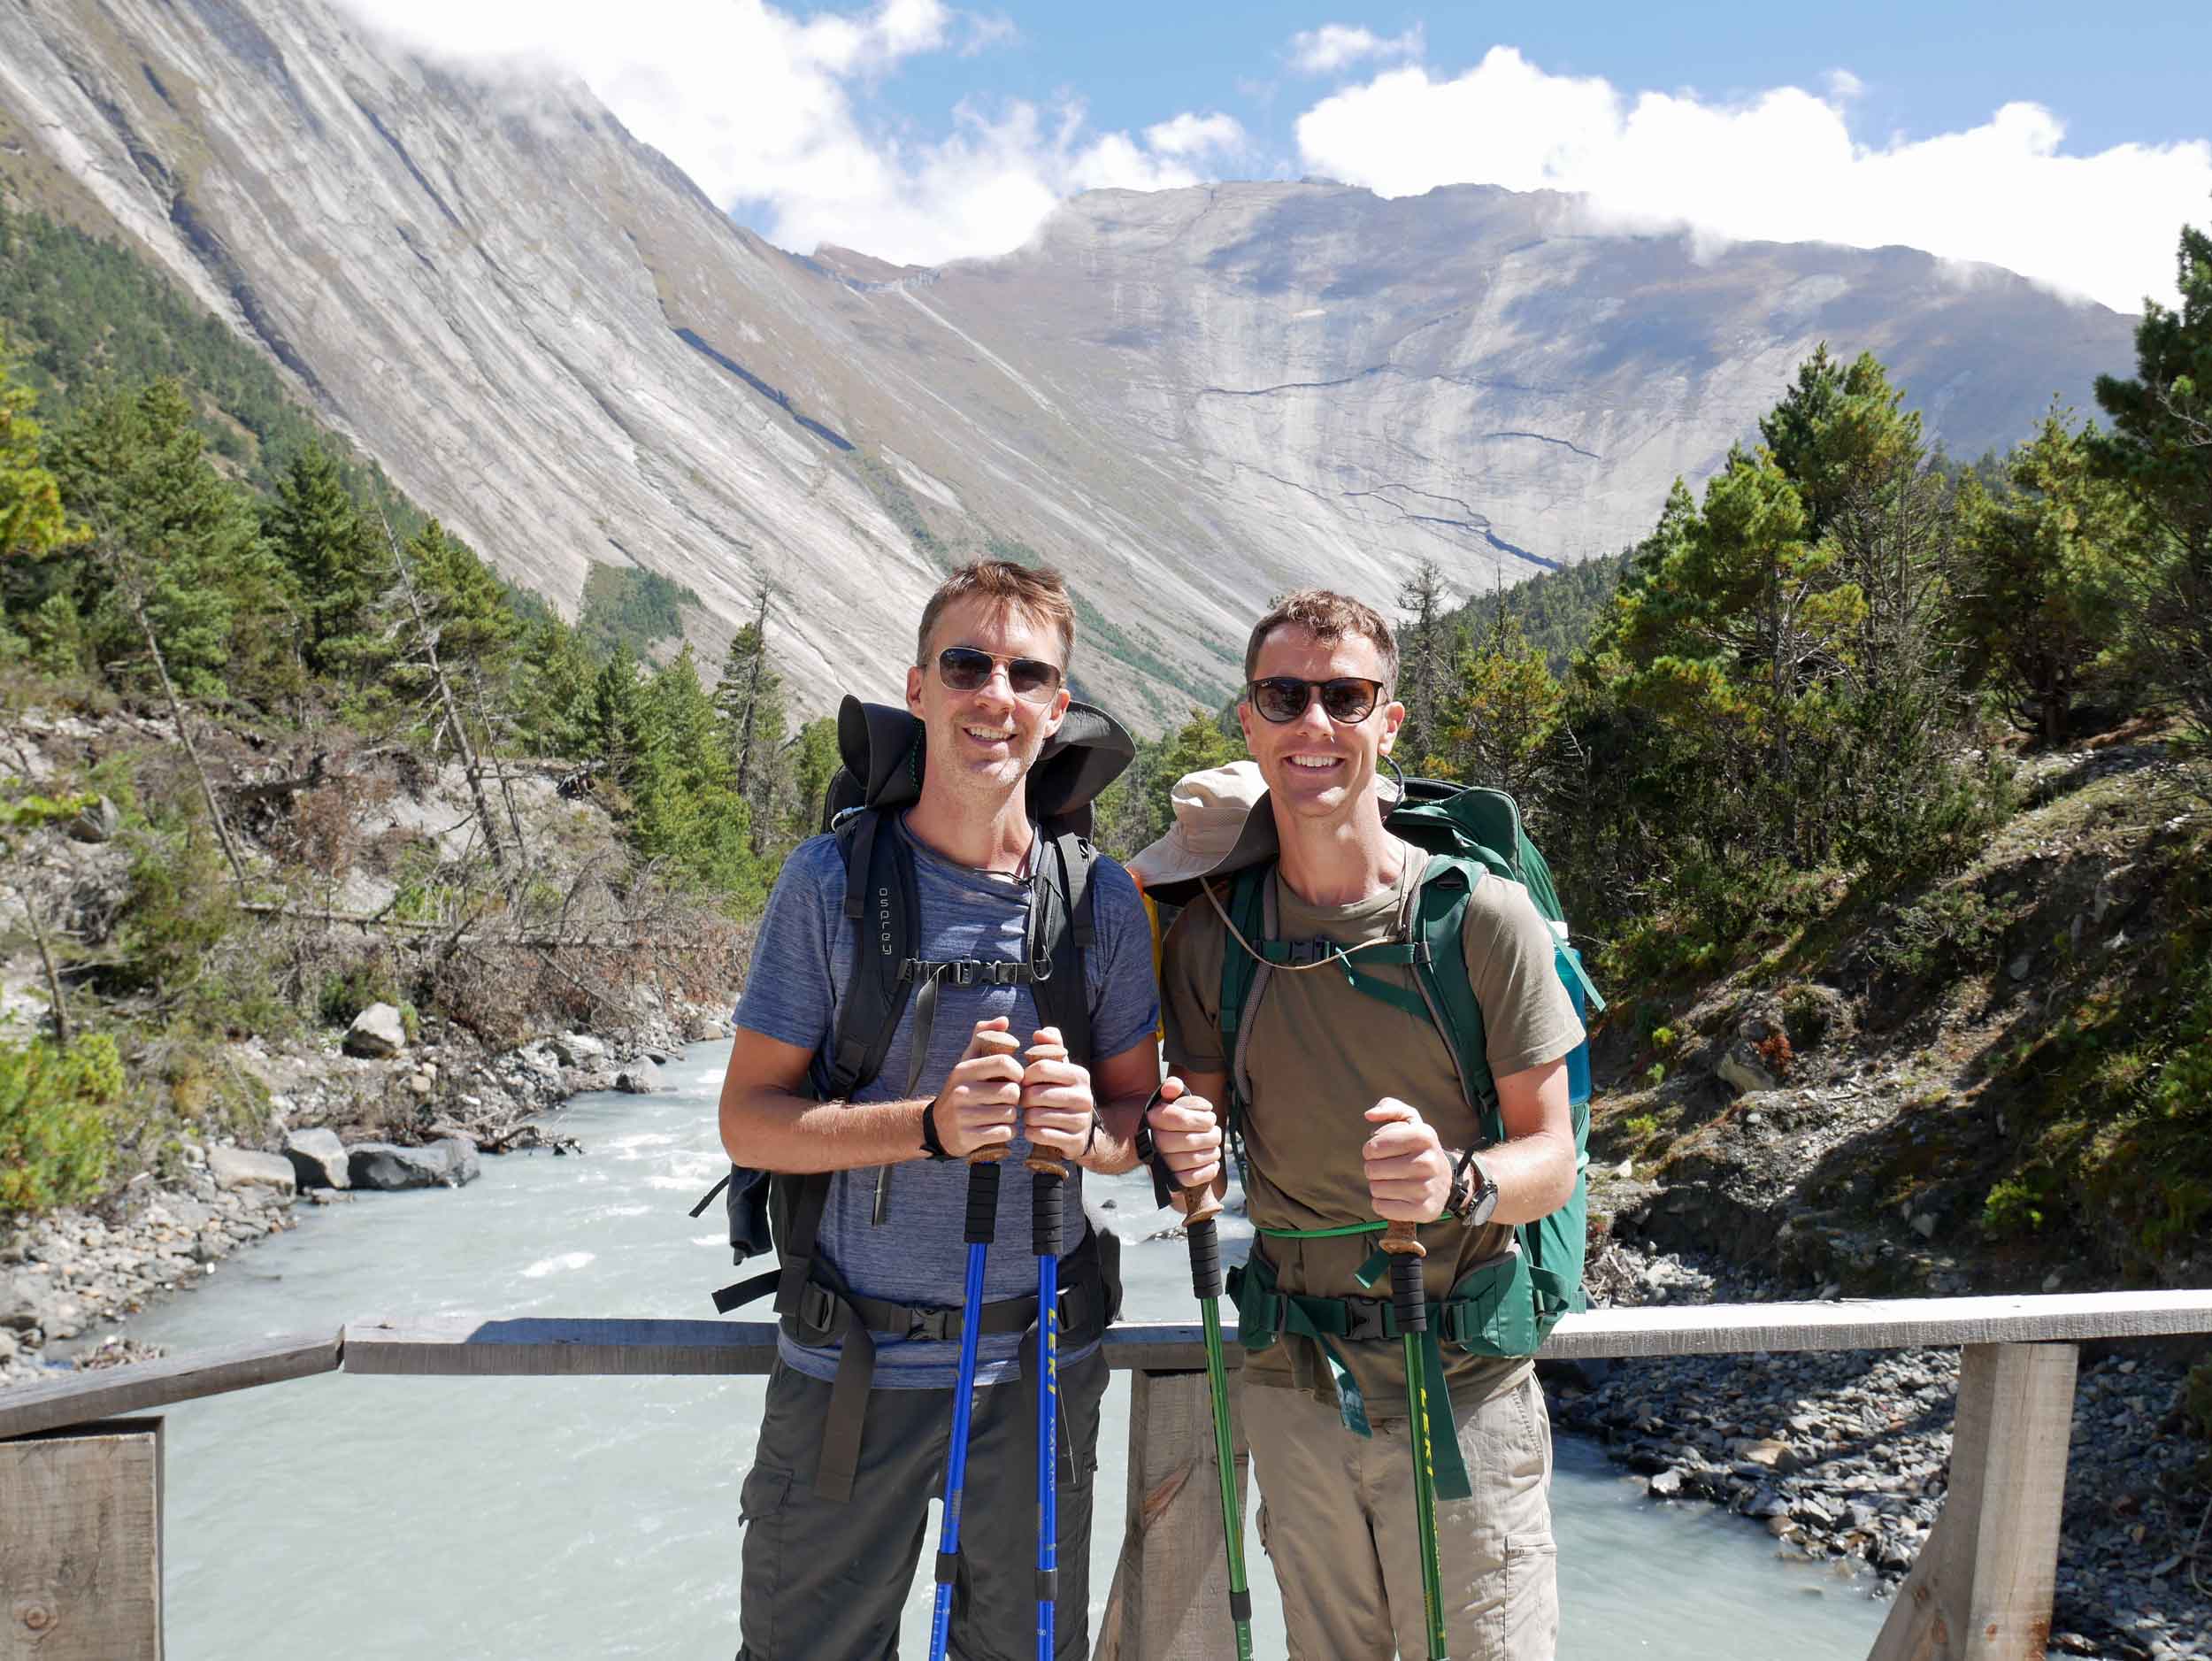  We were fitted out for this seven-day sojourn, hiking poles and all! 